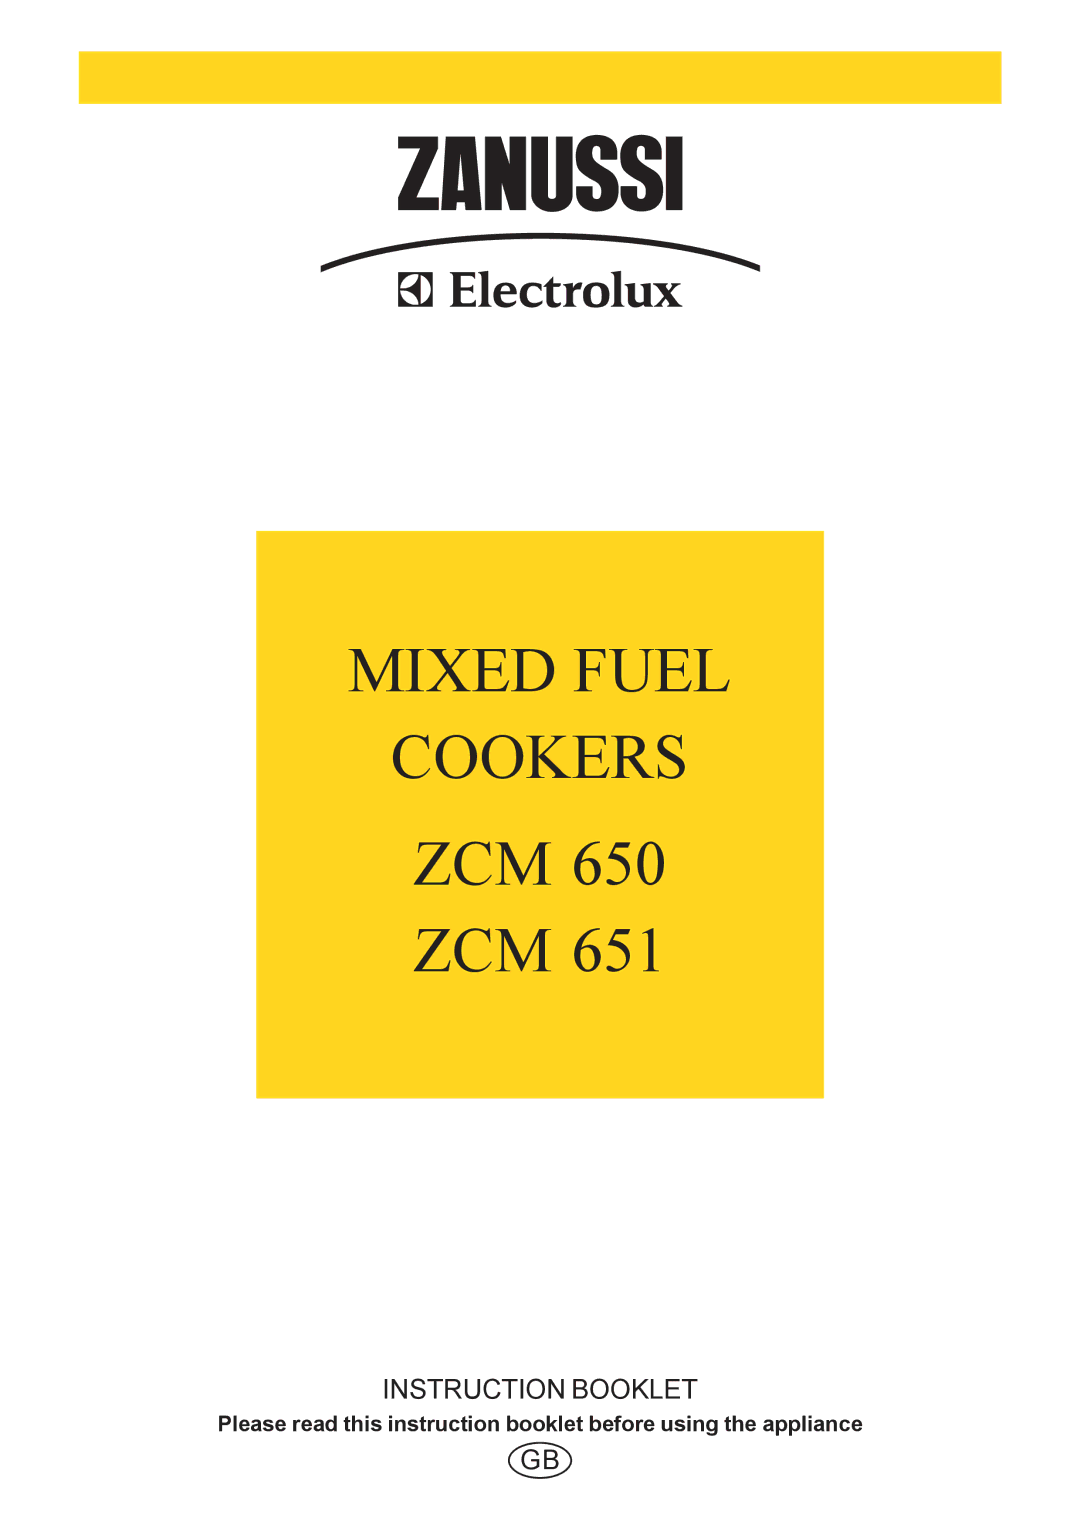 Zanussi ZCM 651, ZCM 650 manual Mixed Fuel Cookers 